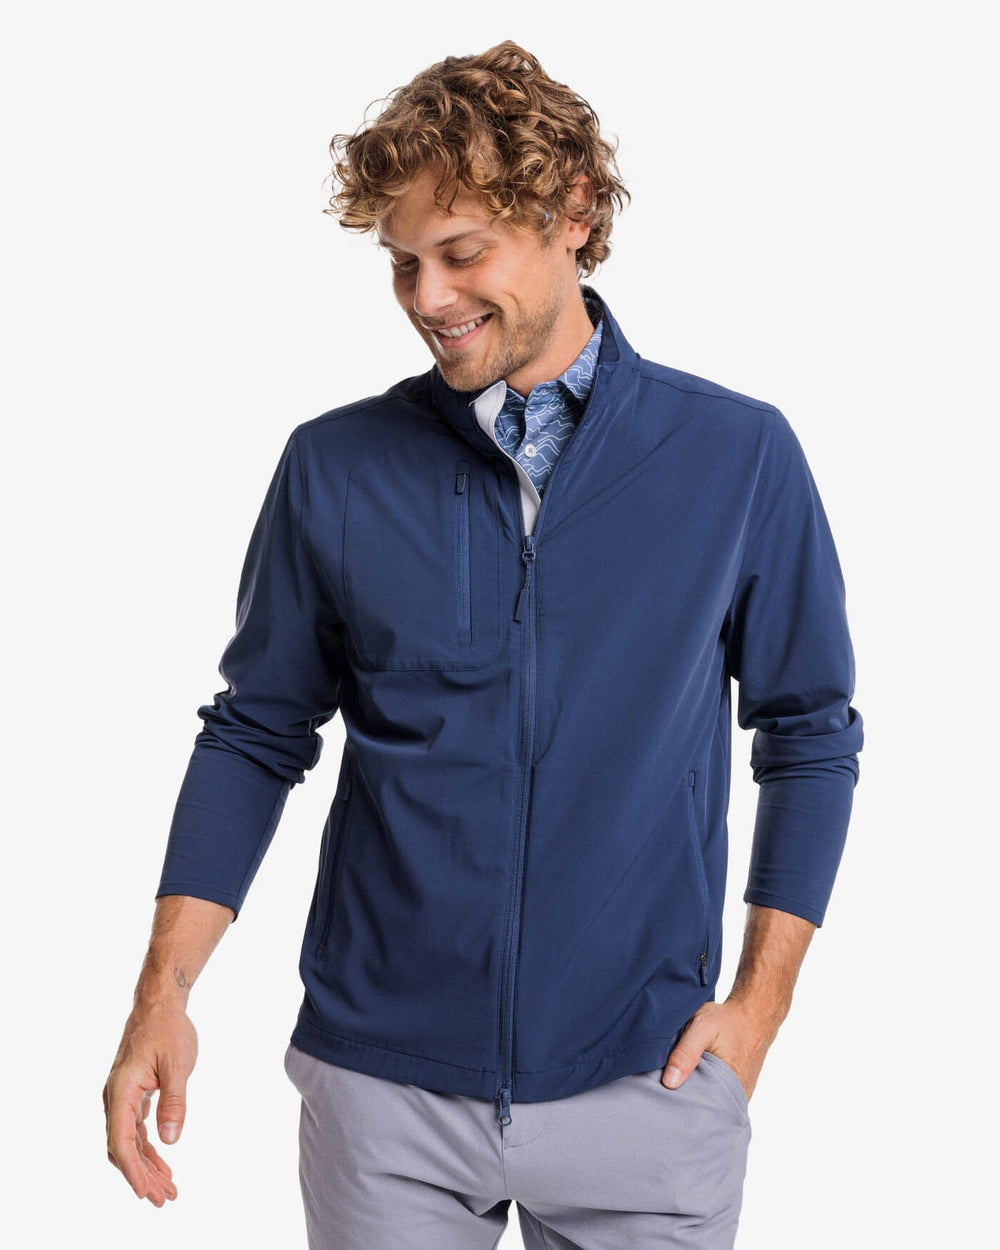 The front view of the Southern Tide Bowline Performance Jacket by Southern Tide - Dress Blue